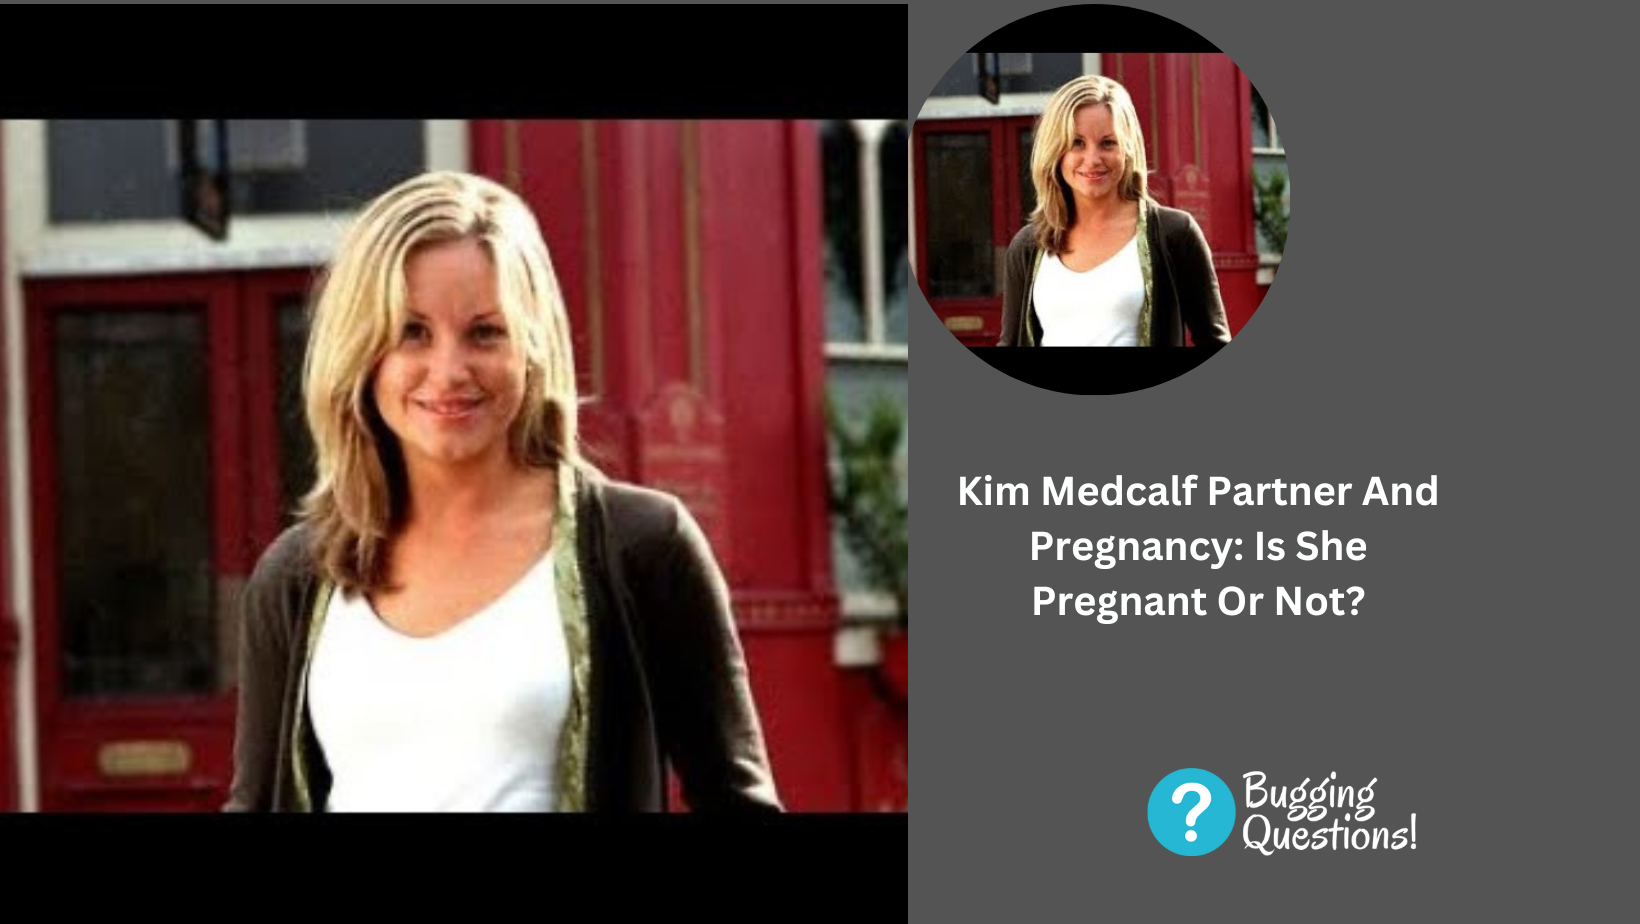 Kim Medcalf Partner And Pregnancy: Is She Pregnant Or Not?